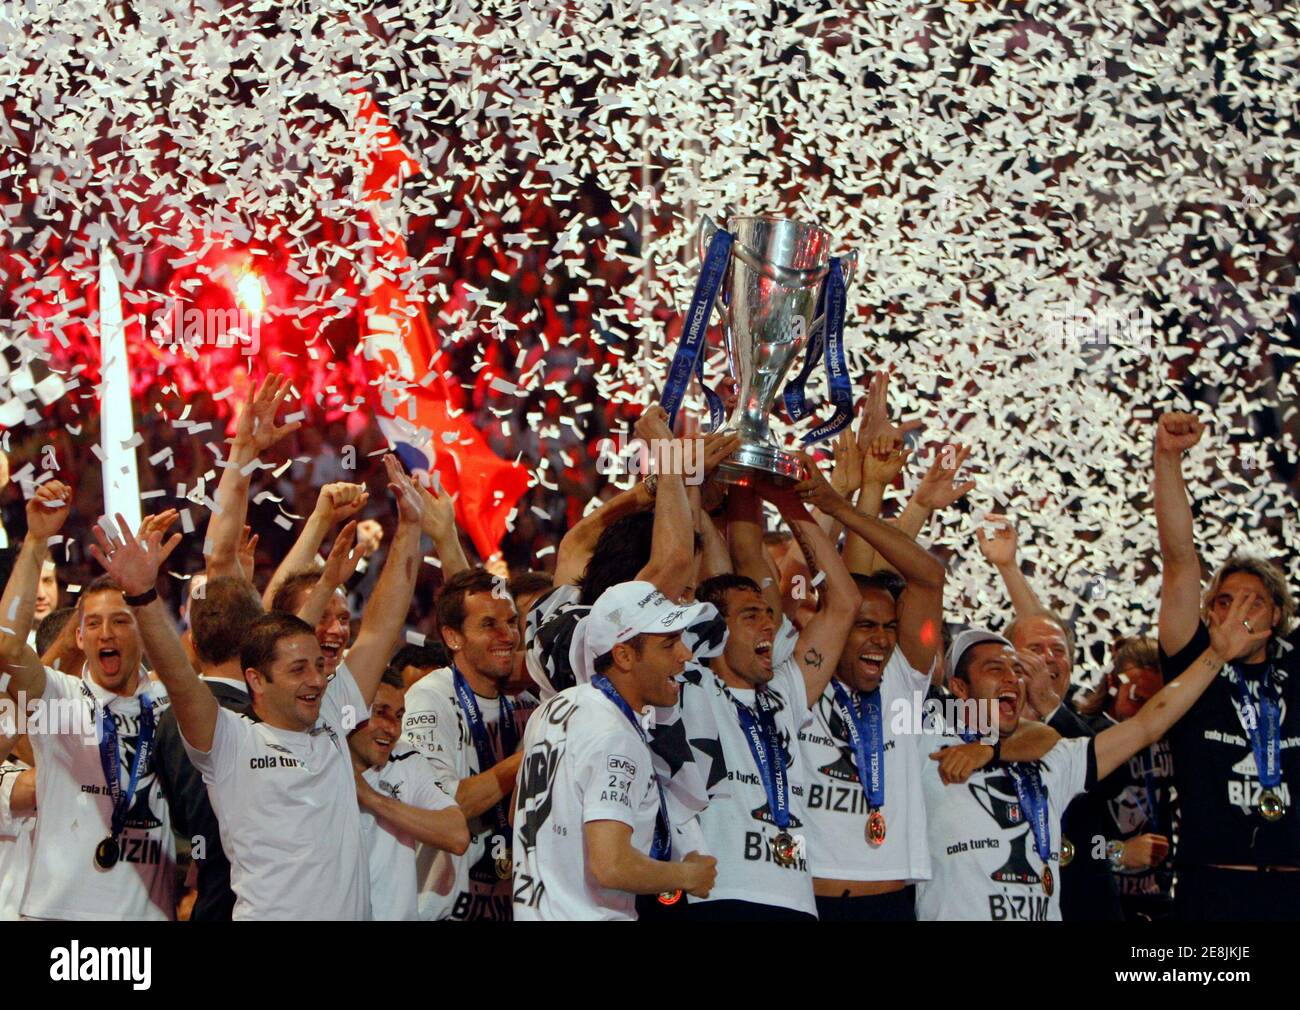 Besiktas players lift the Turkish Super League soccer championship trophy during a celebration at Inonu stadium in Istanbul May 31, 2009.REUTERS/Murad Sezer (TURKEY SPORT SOCCER) Stock Photo